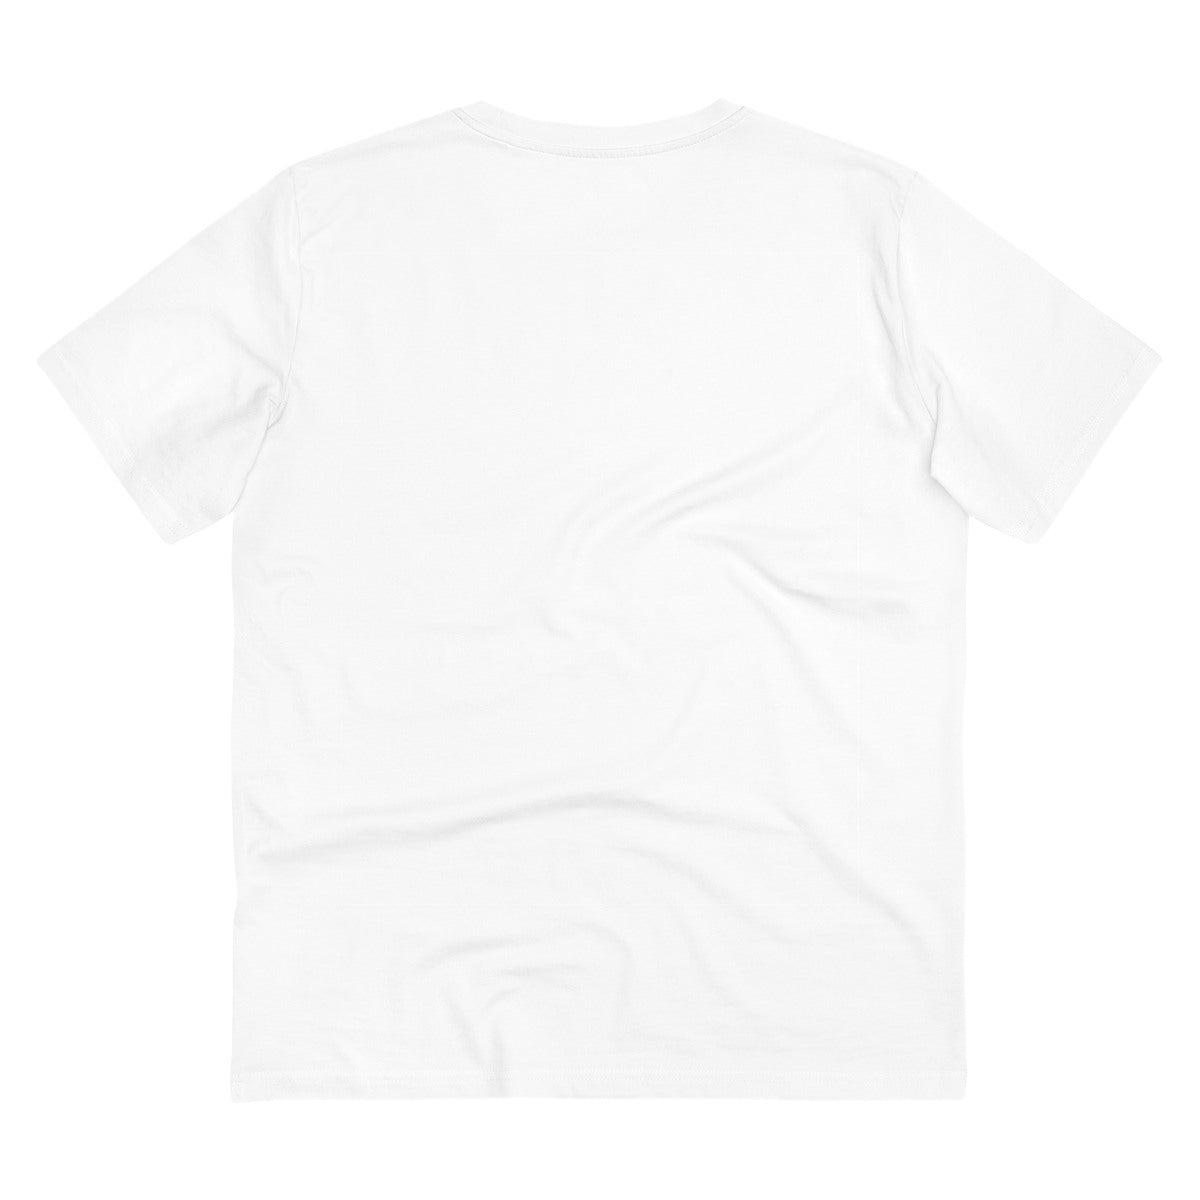 Men's PC Cotton 48th Anniversary Printed T Shirt (Color: White, Thread Count: 180GSM) - GillKart